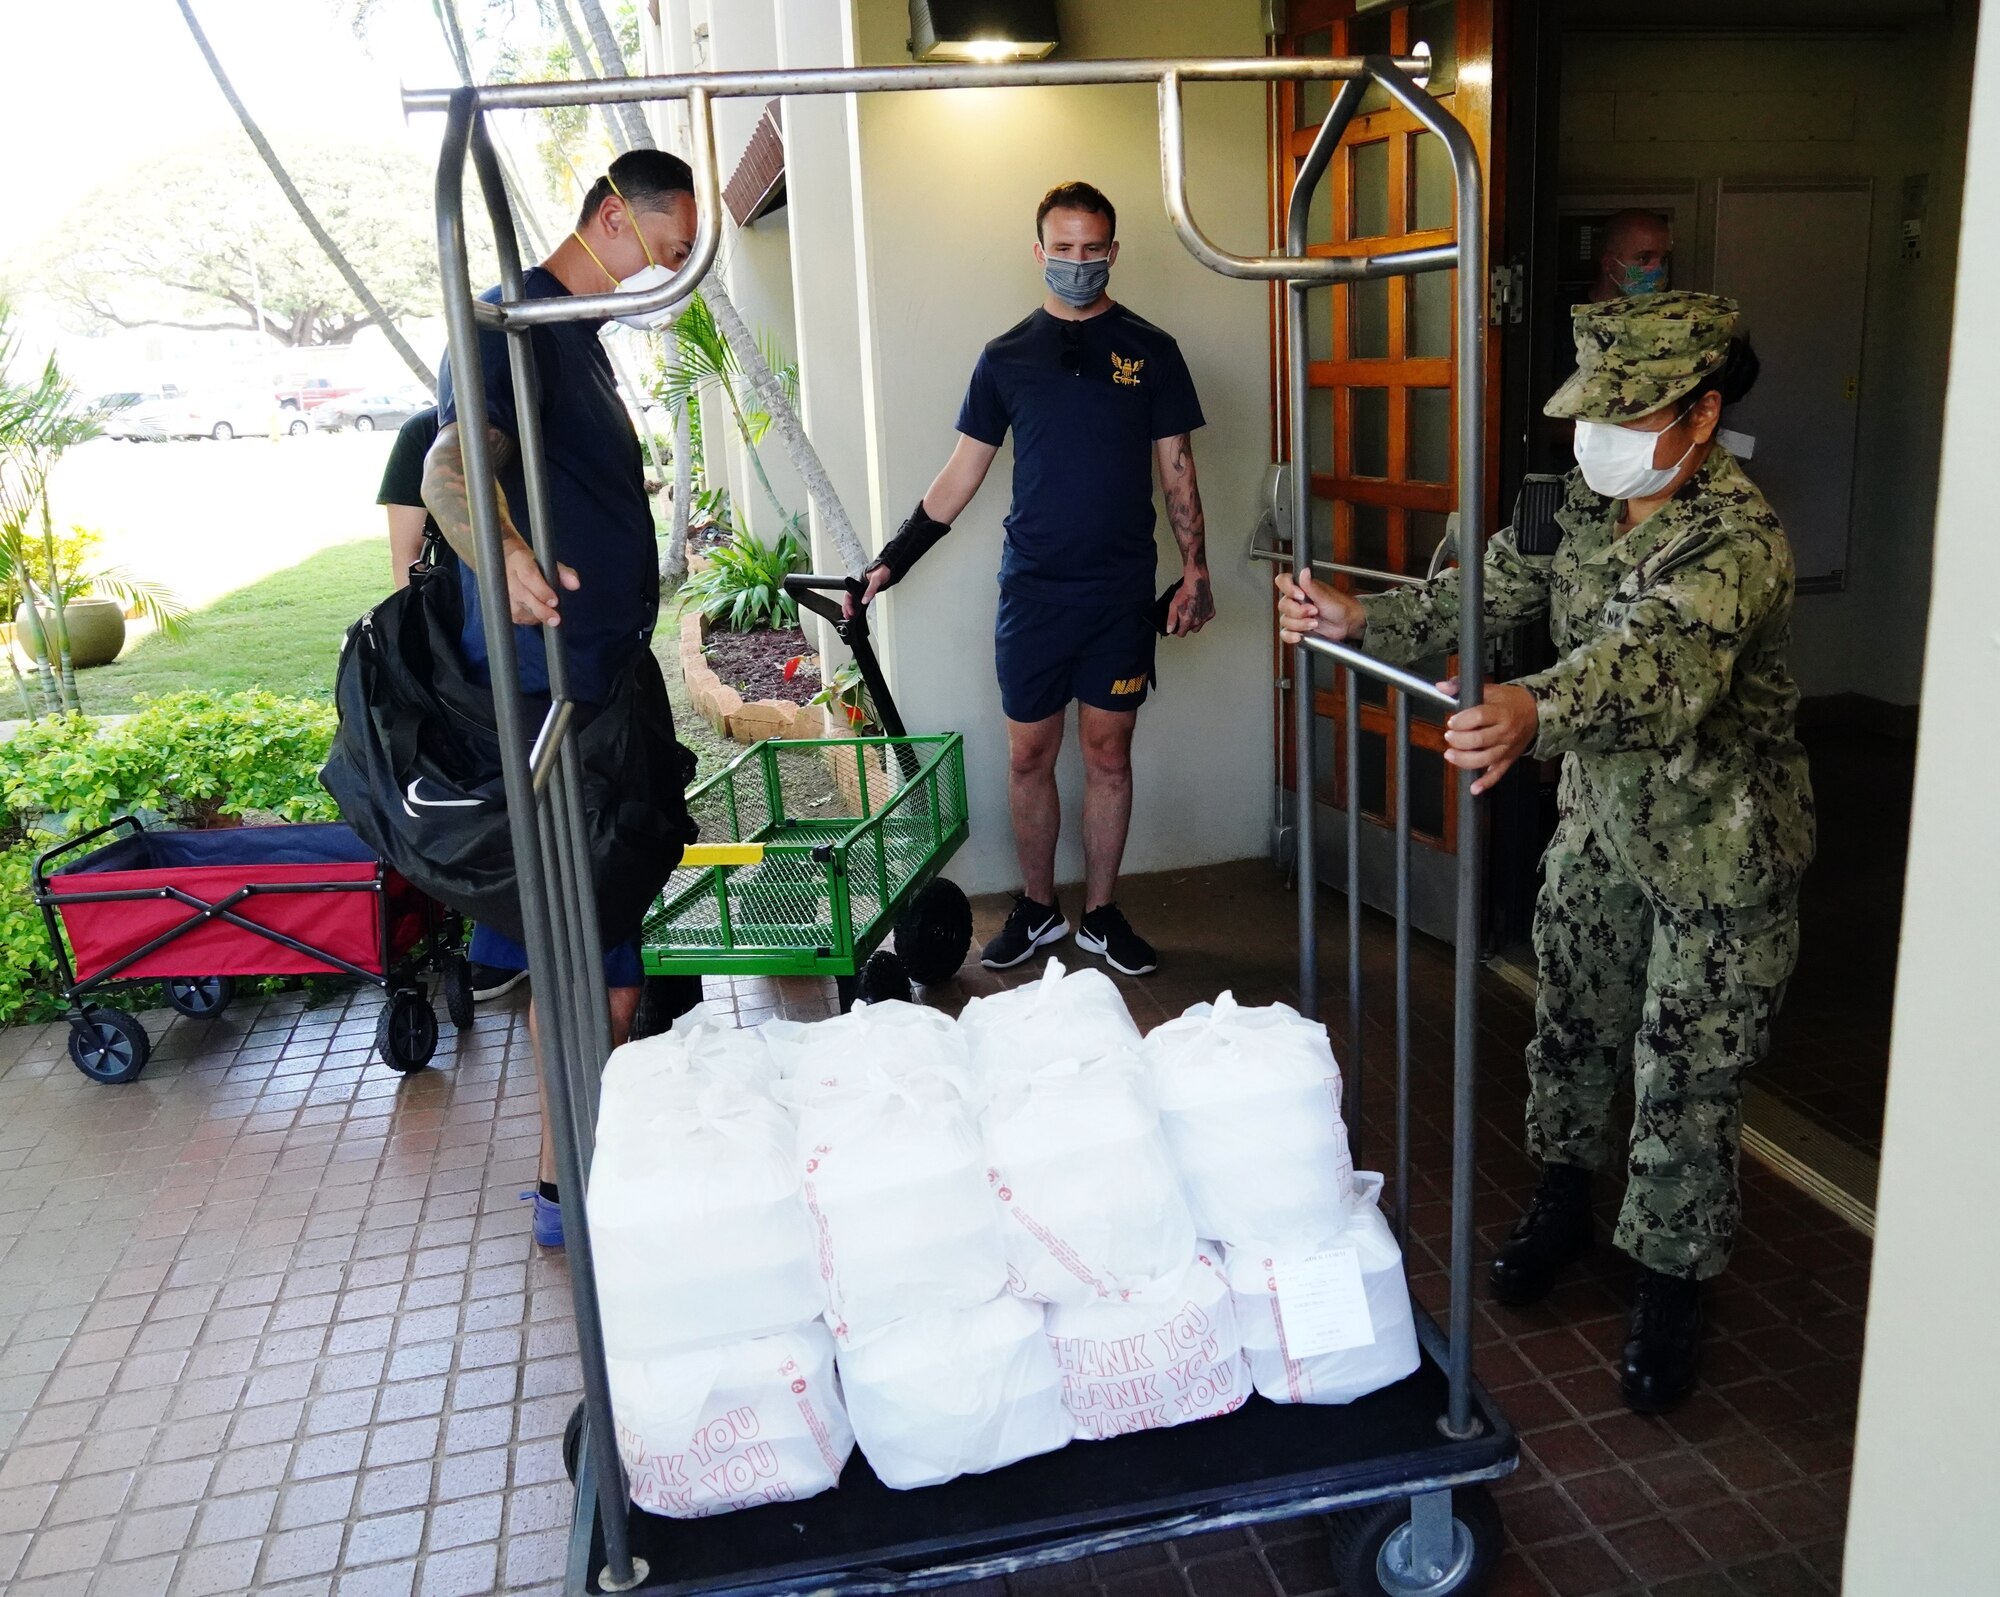 U.S. Navy Sailors deliver meals from the Hale Aina Dining Facility to newly arrived personnel placed on restriction of movement on Joint Base Pearl Harbor-Hickam, Hawaii, April 16, 2020. Volunteers with the COVID-19 Support Team distributed meals and essentials to ROM military personnel in the midst of the COVID-19 pandemic. (U.S. Air Force photos by Airman 1st Class Erin Baxter)